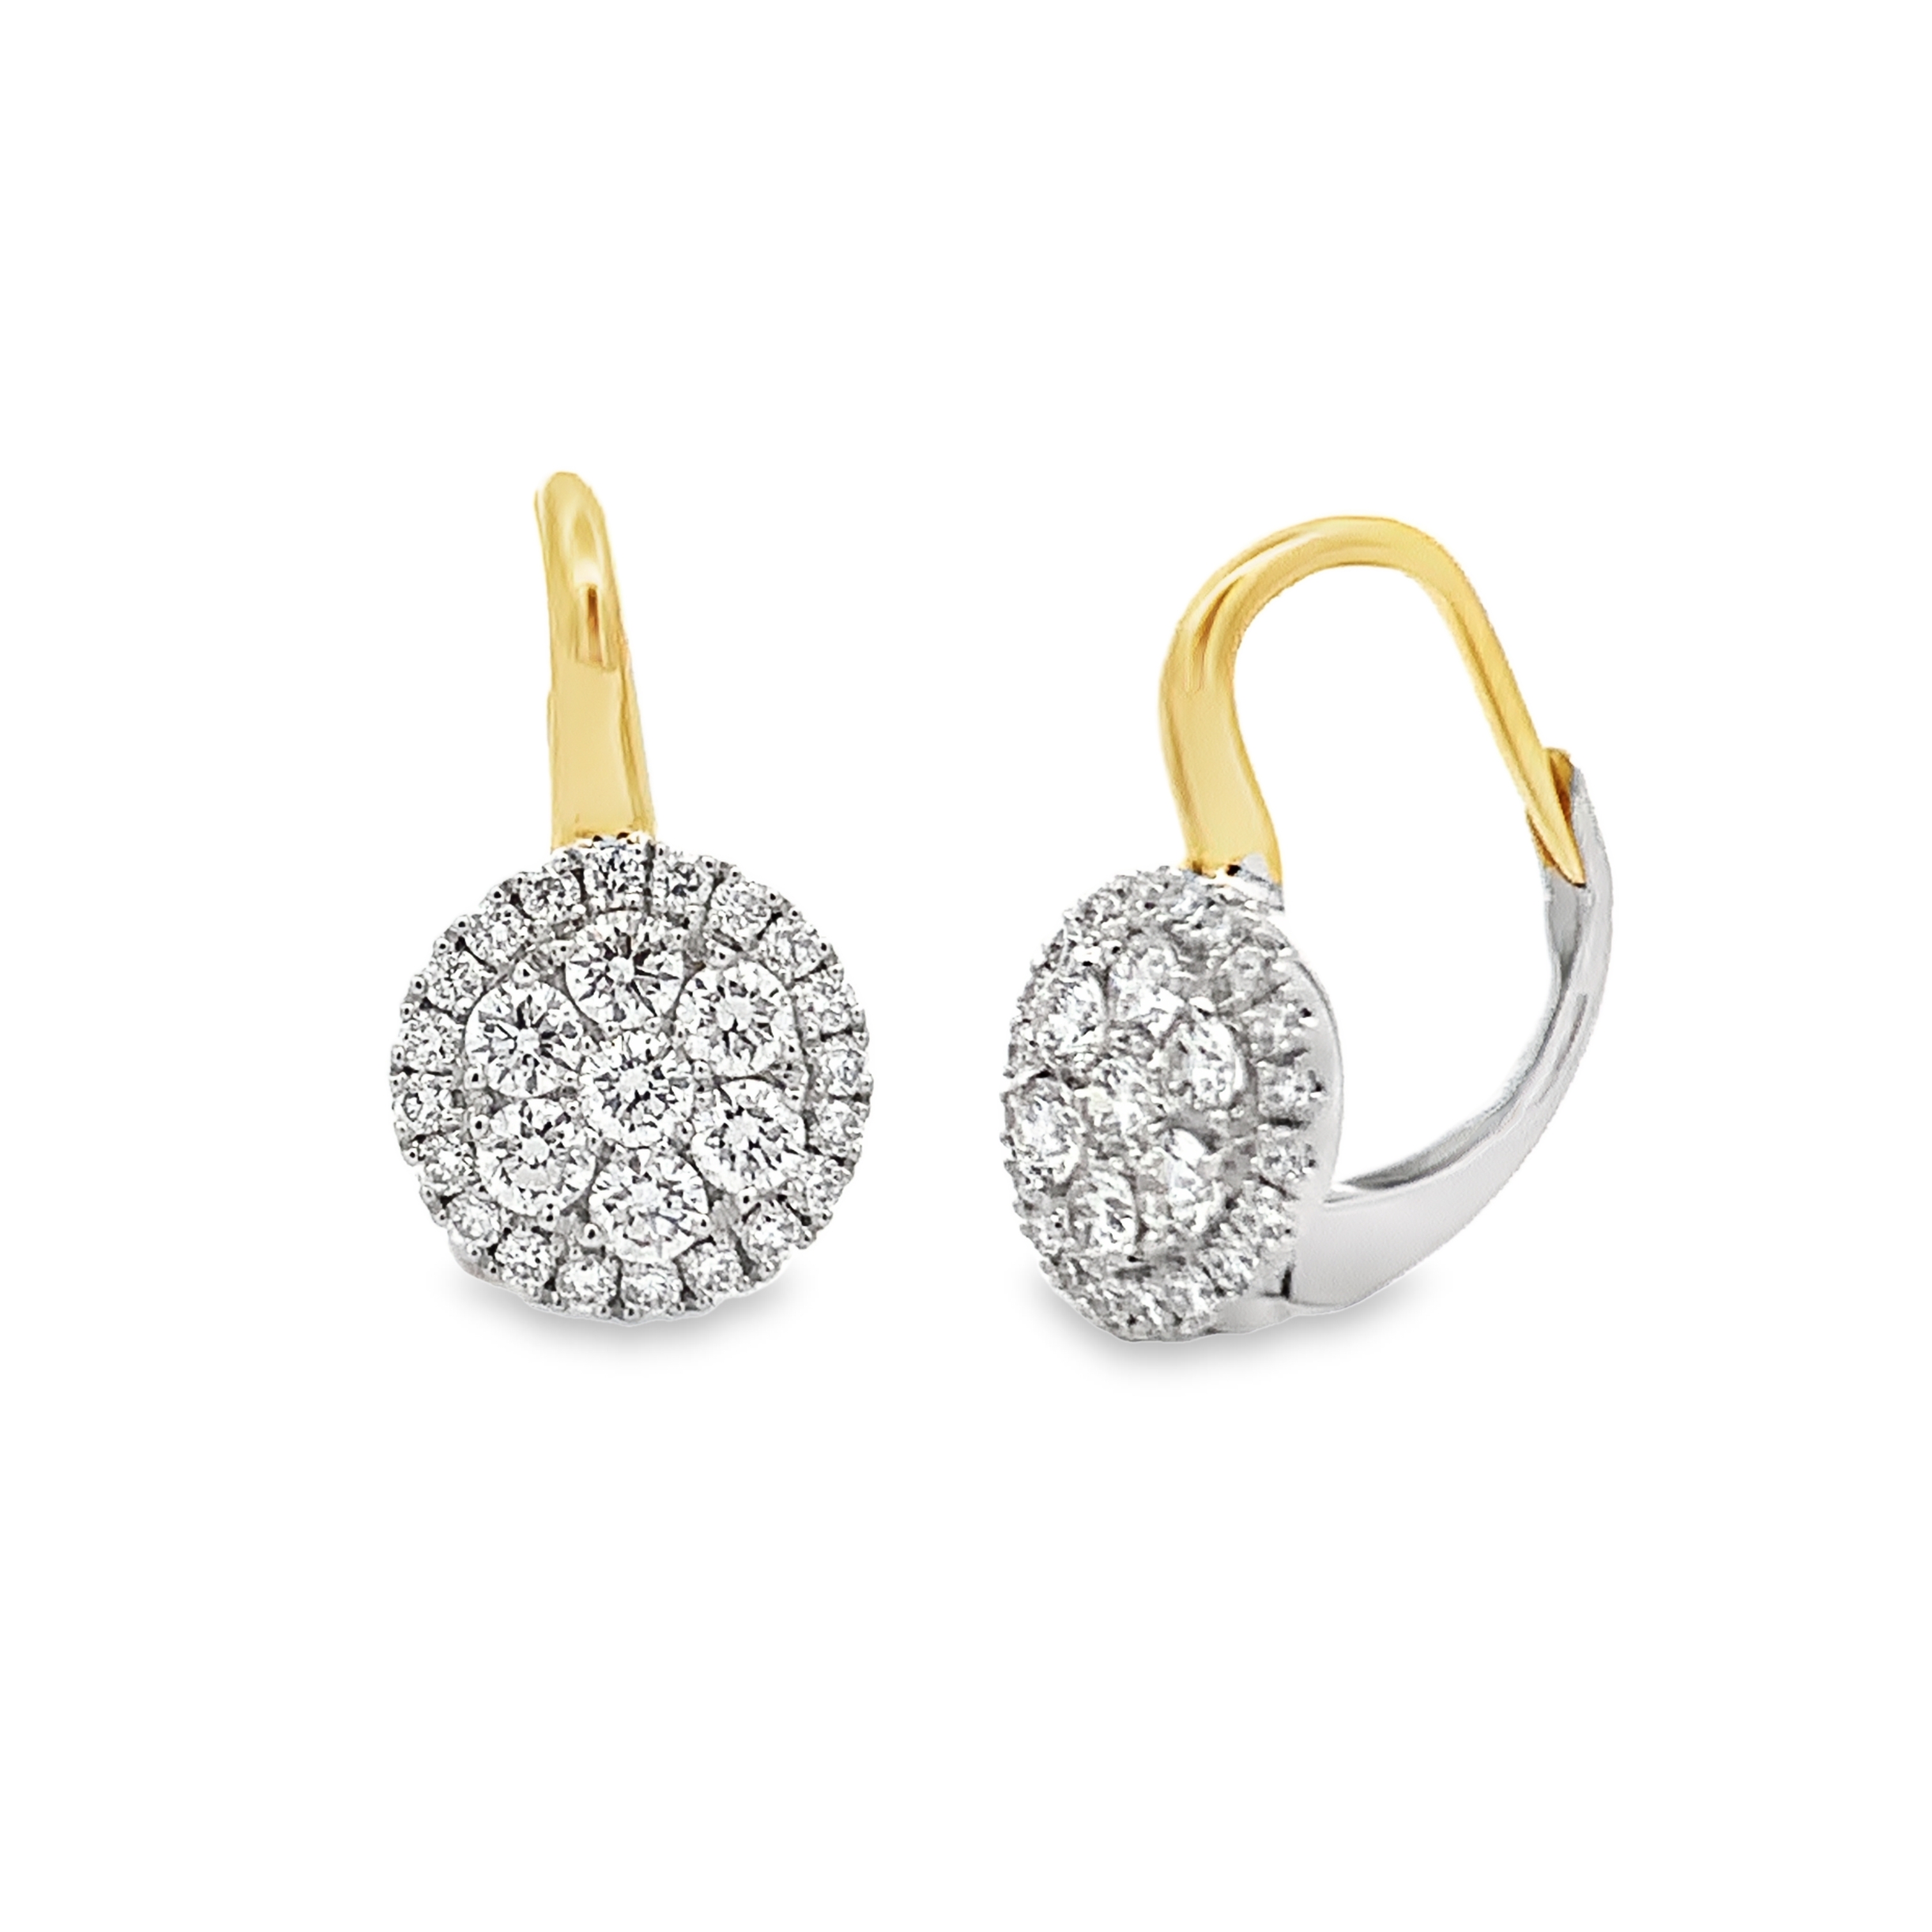 Frederic Sage 14K Two-Tone Diamond Lever Cluster Earrings